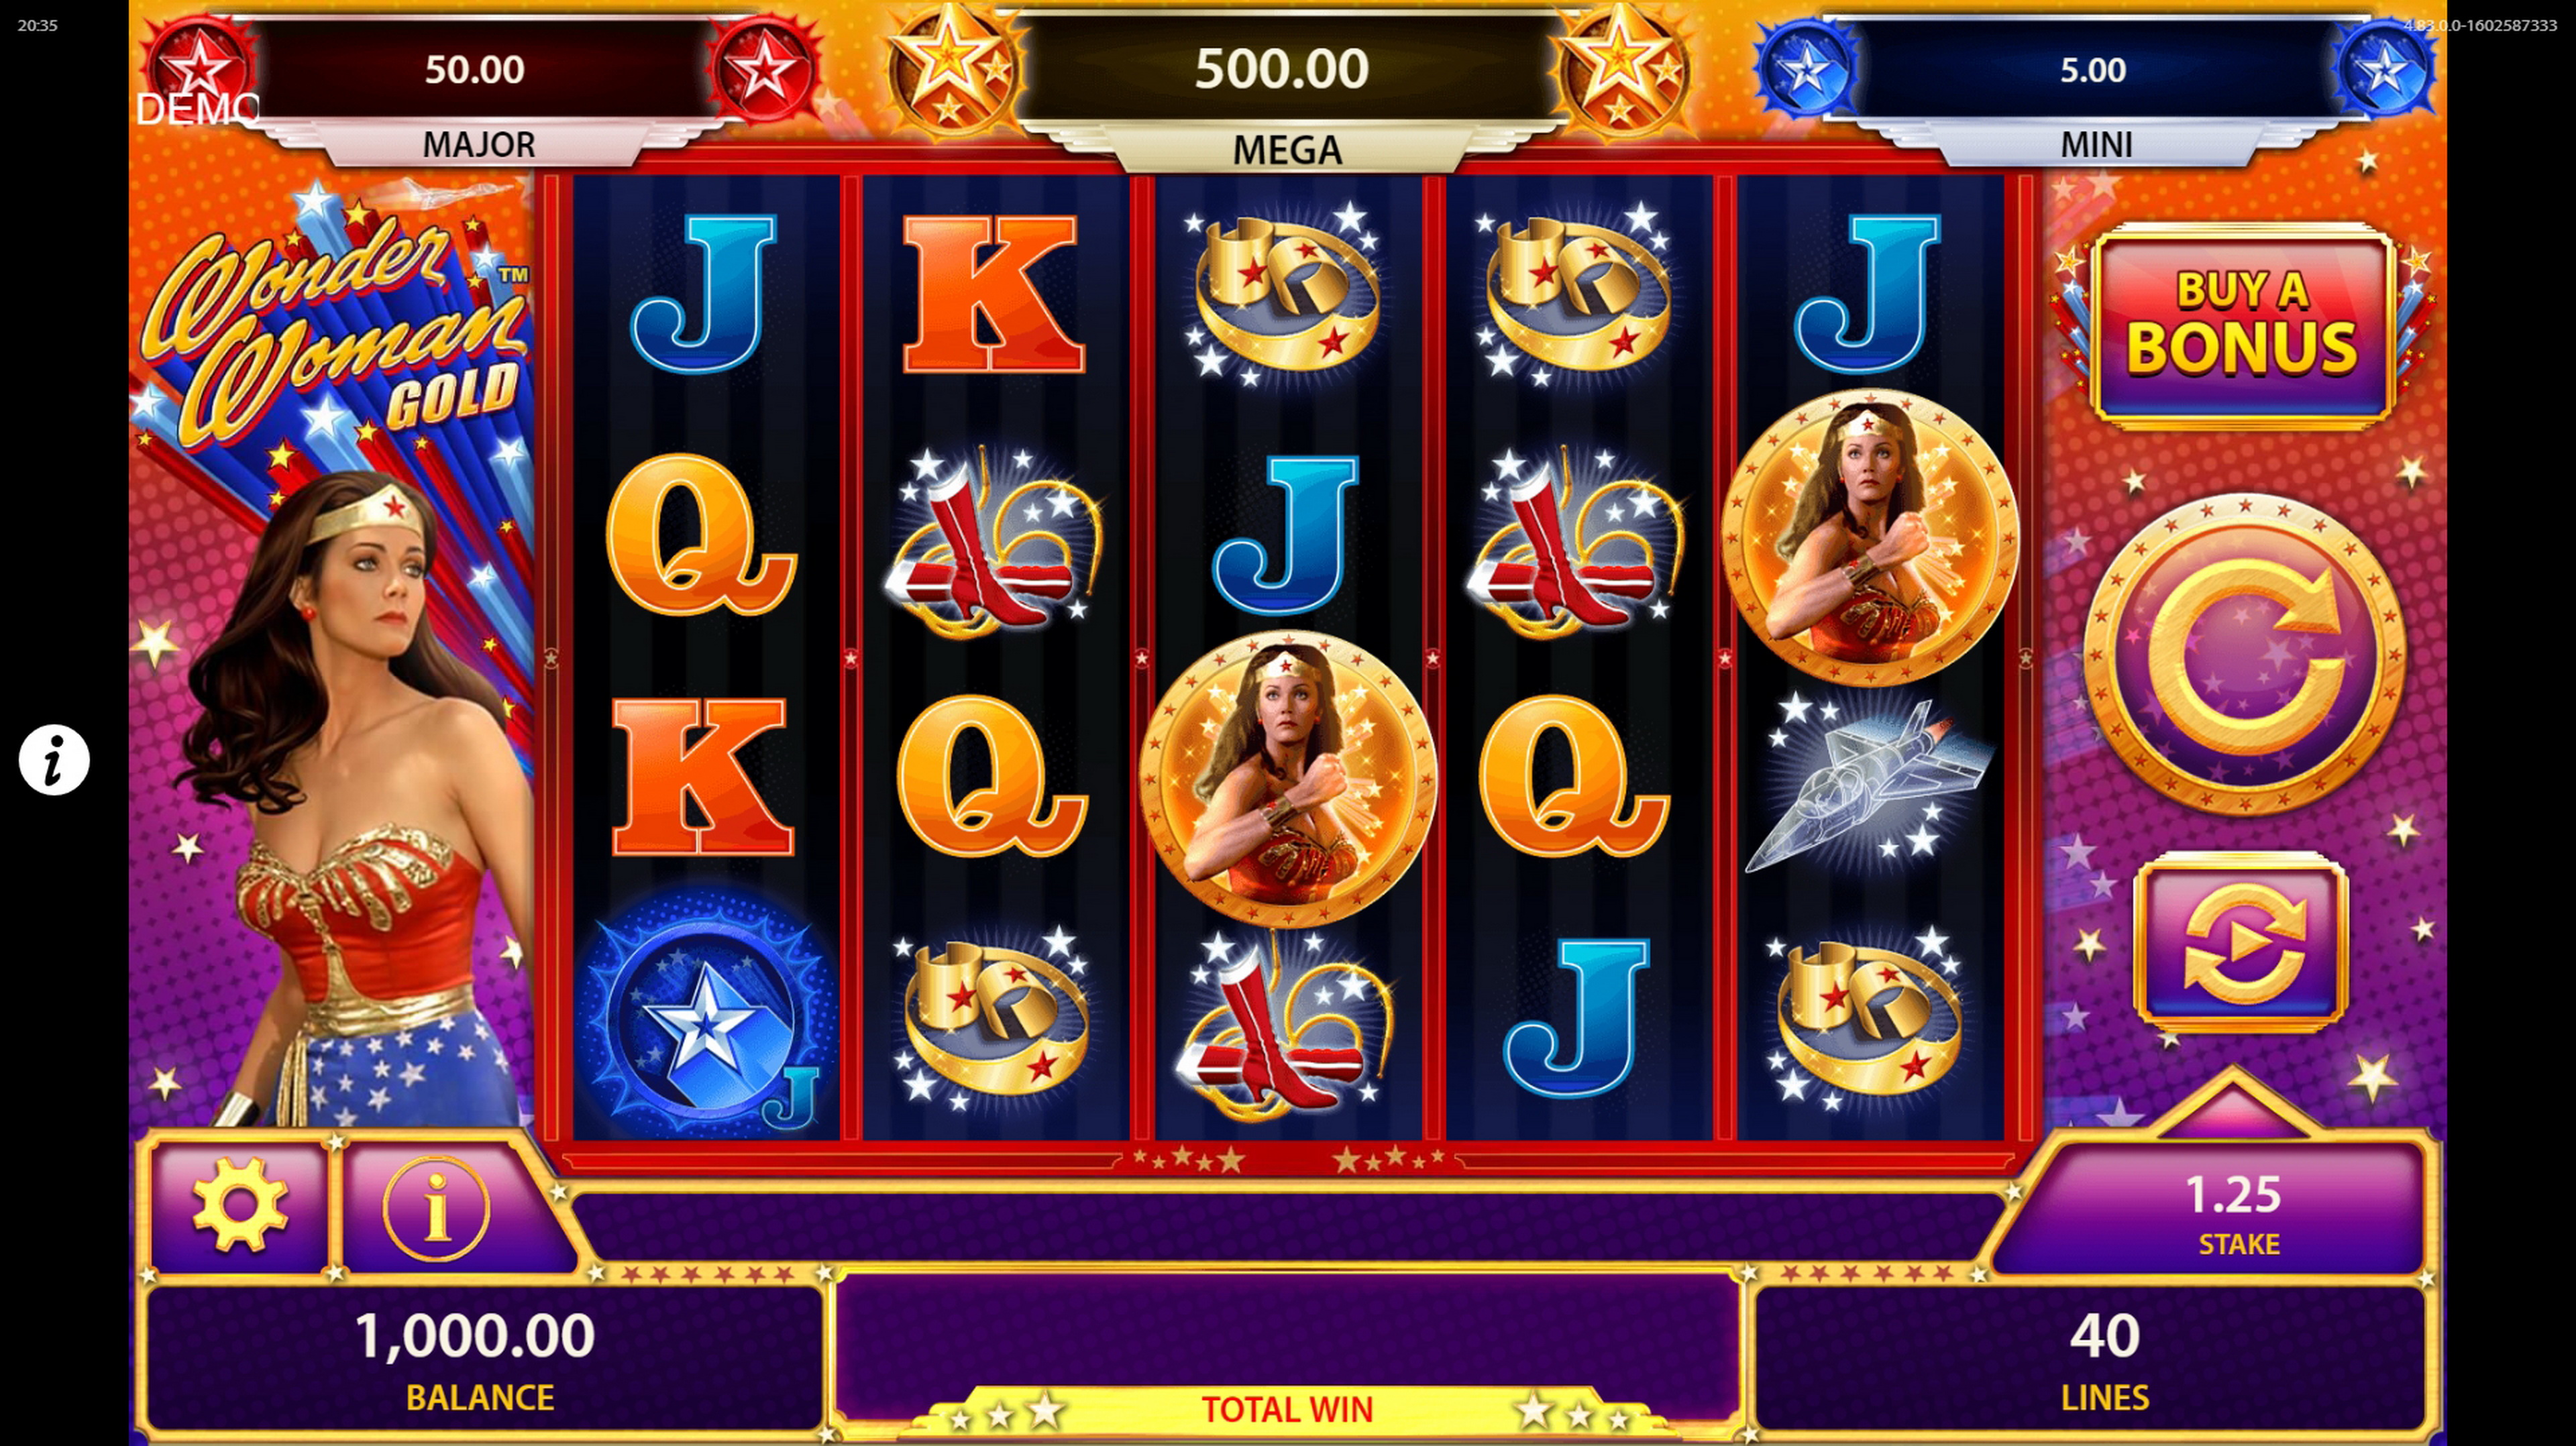 Reels in Wonder Woman Gold Slot Game by Bally Technologies